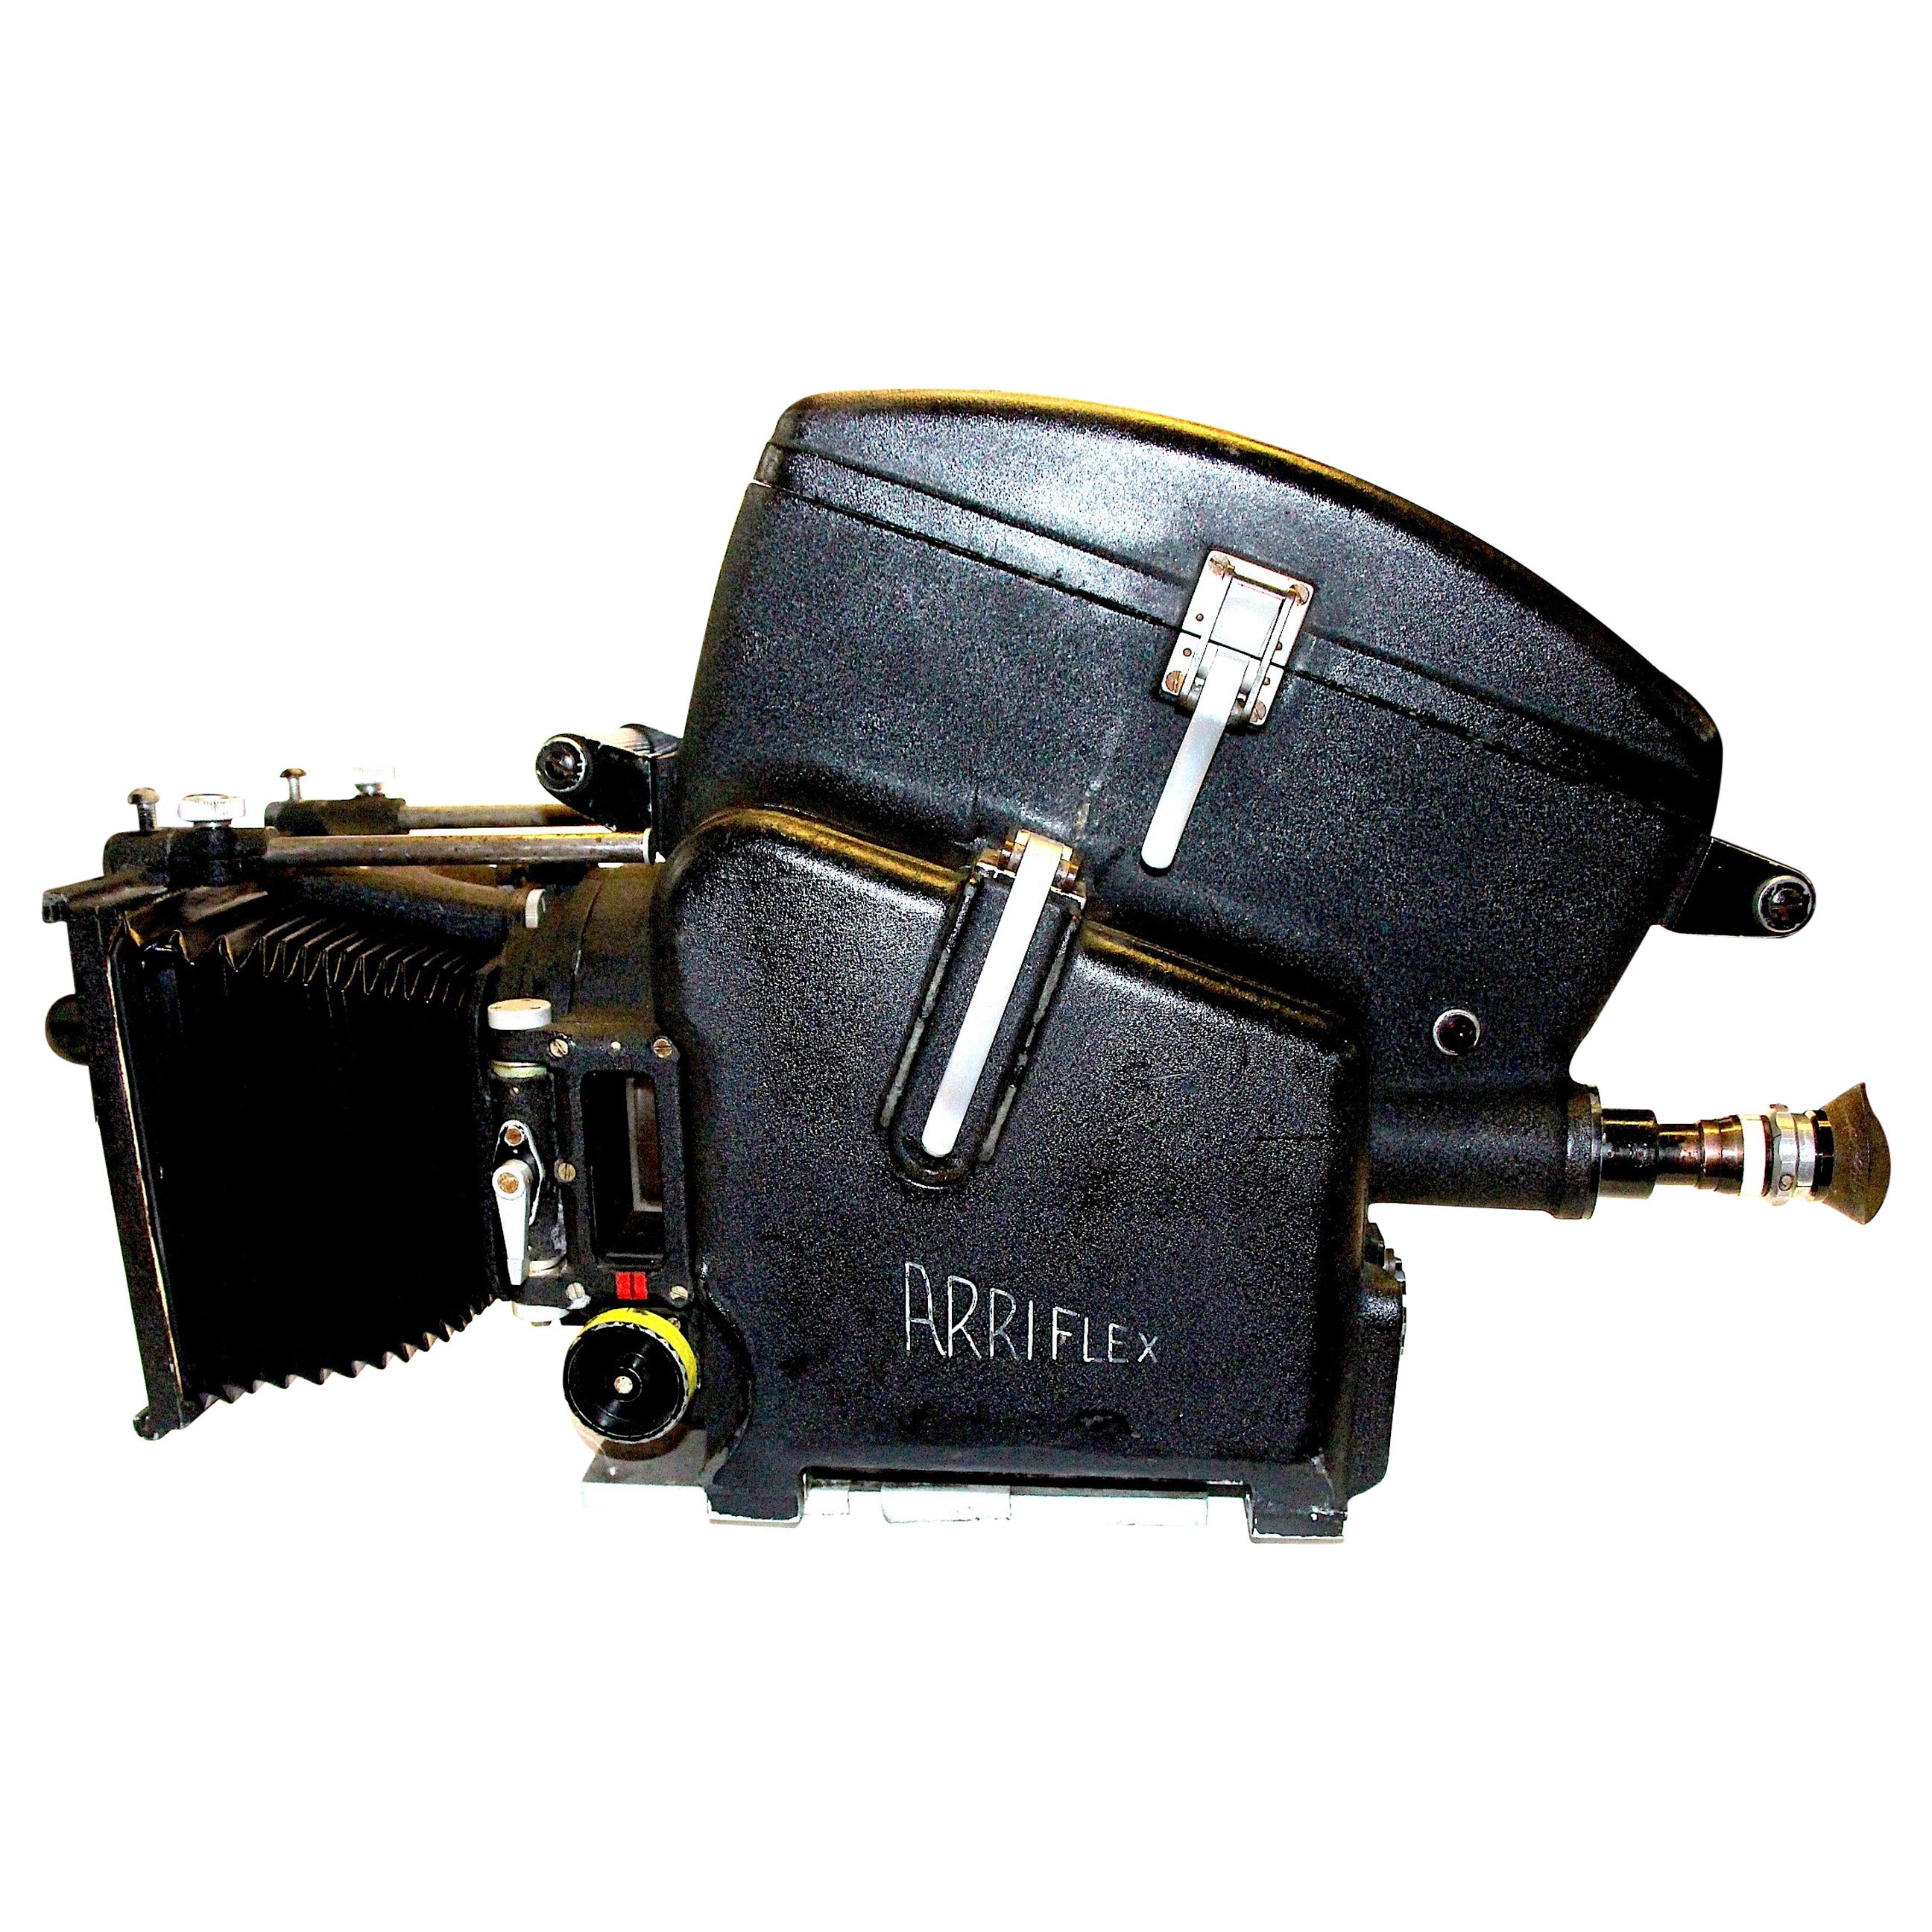 Arriflex 35mm Camera in Factory Blimp Same as Kubricks, circa 1950s 100% Authent For Sale